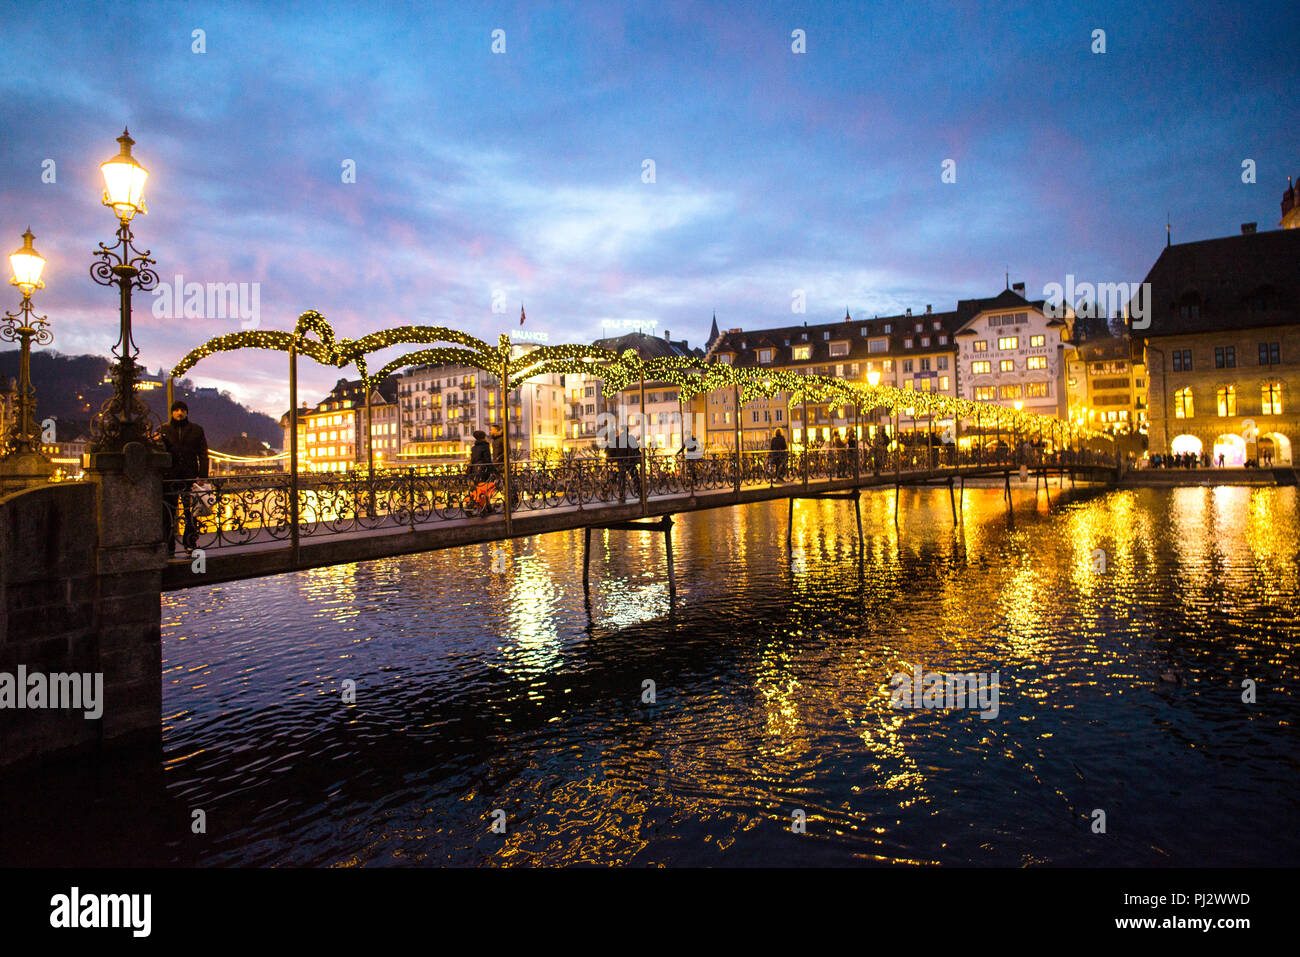 Arched iron footbridge over the River Reuss in Lucerne, Switzerland. Stock Photo